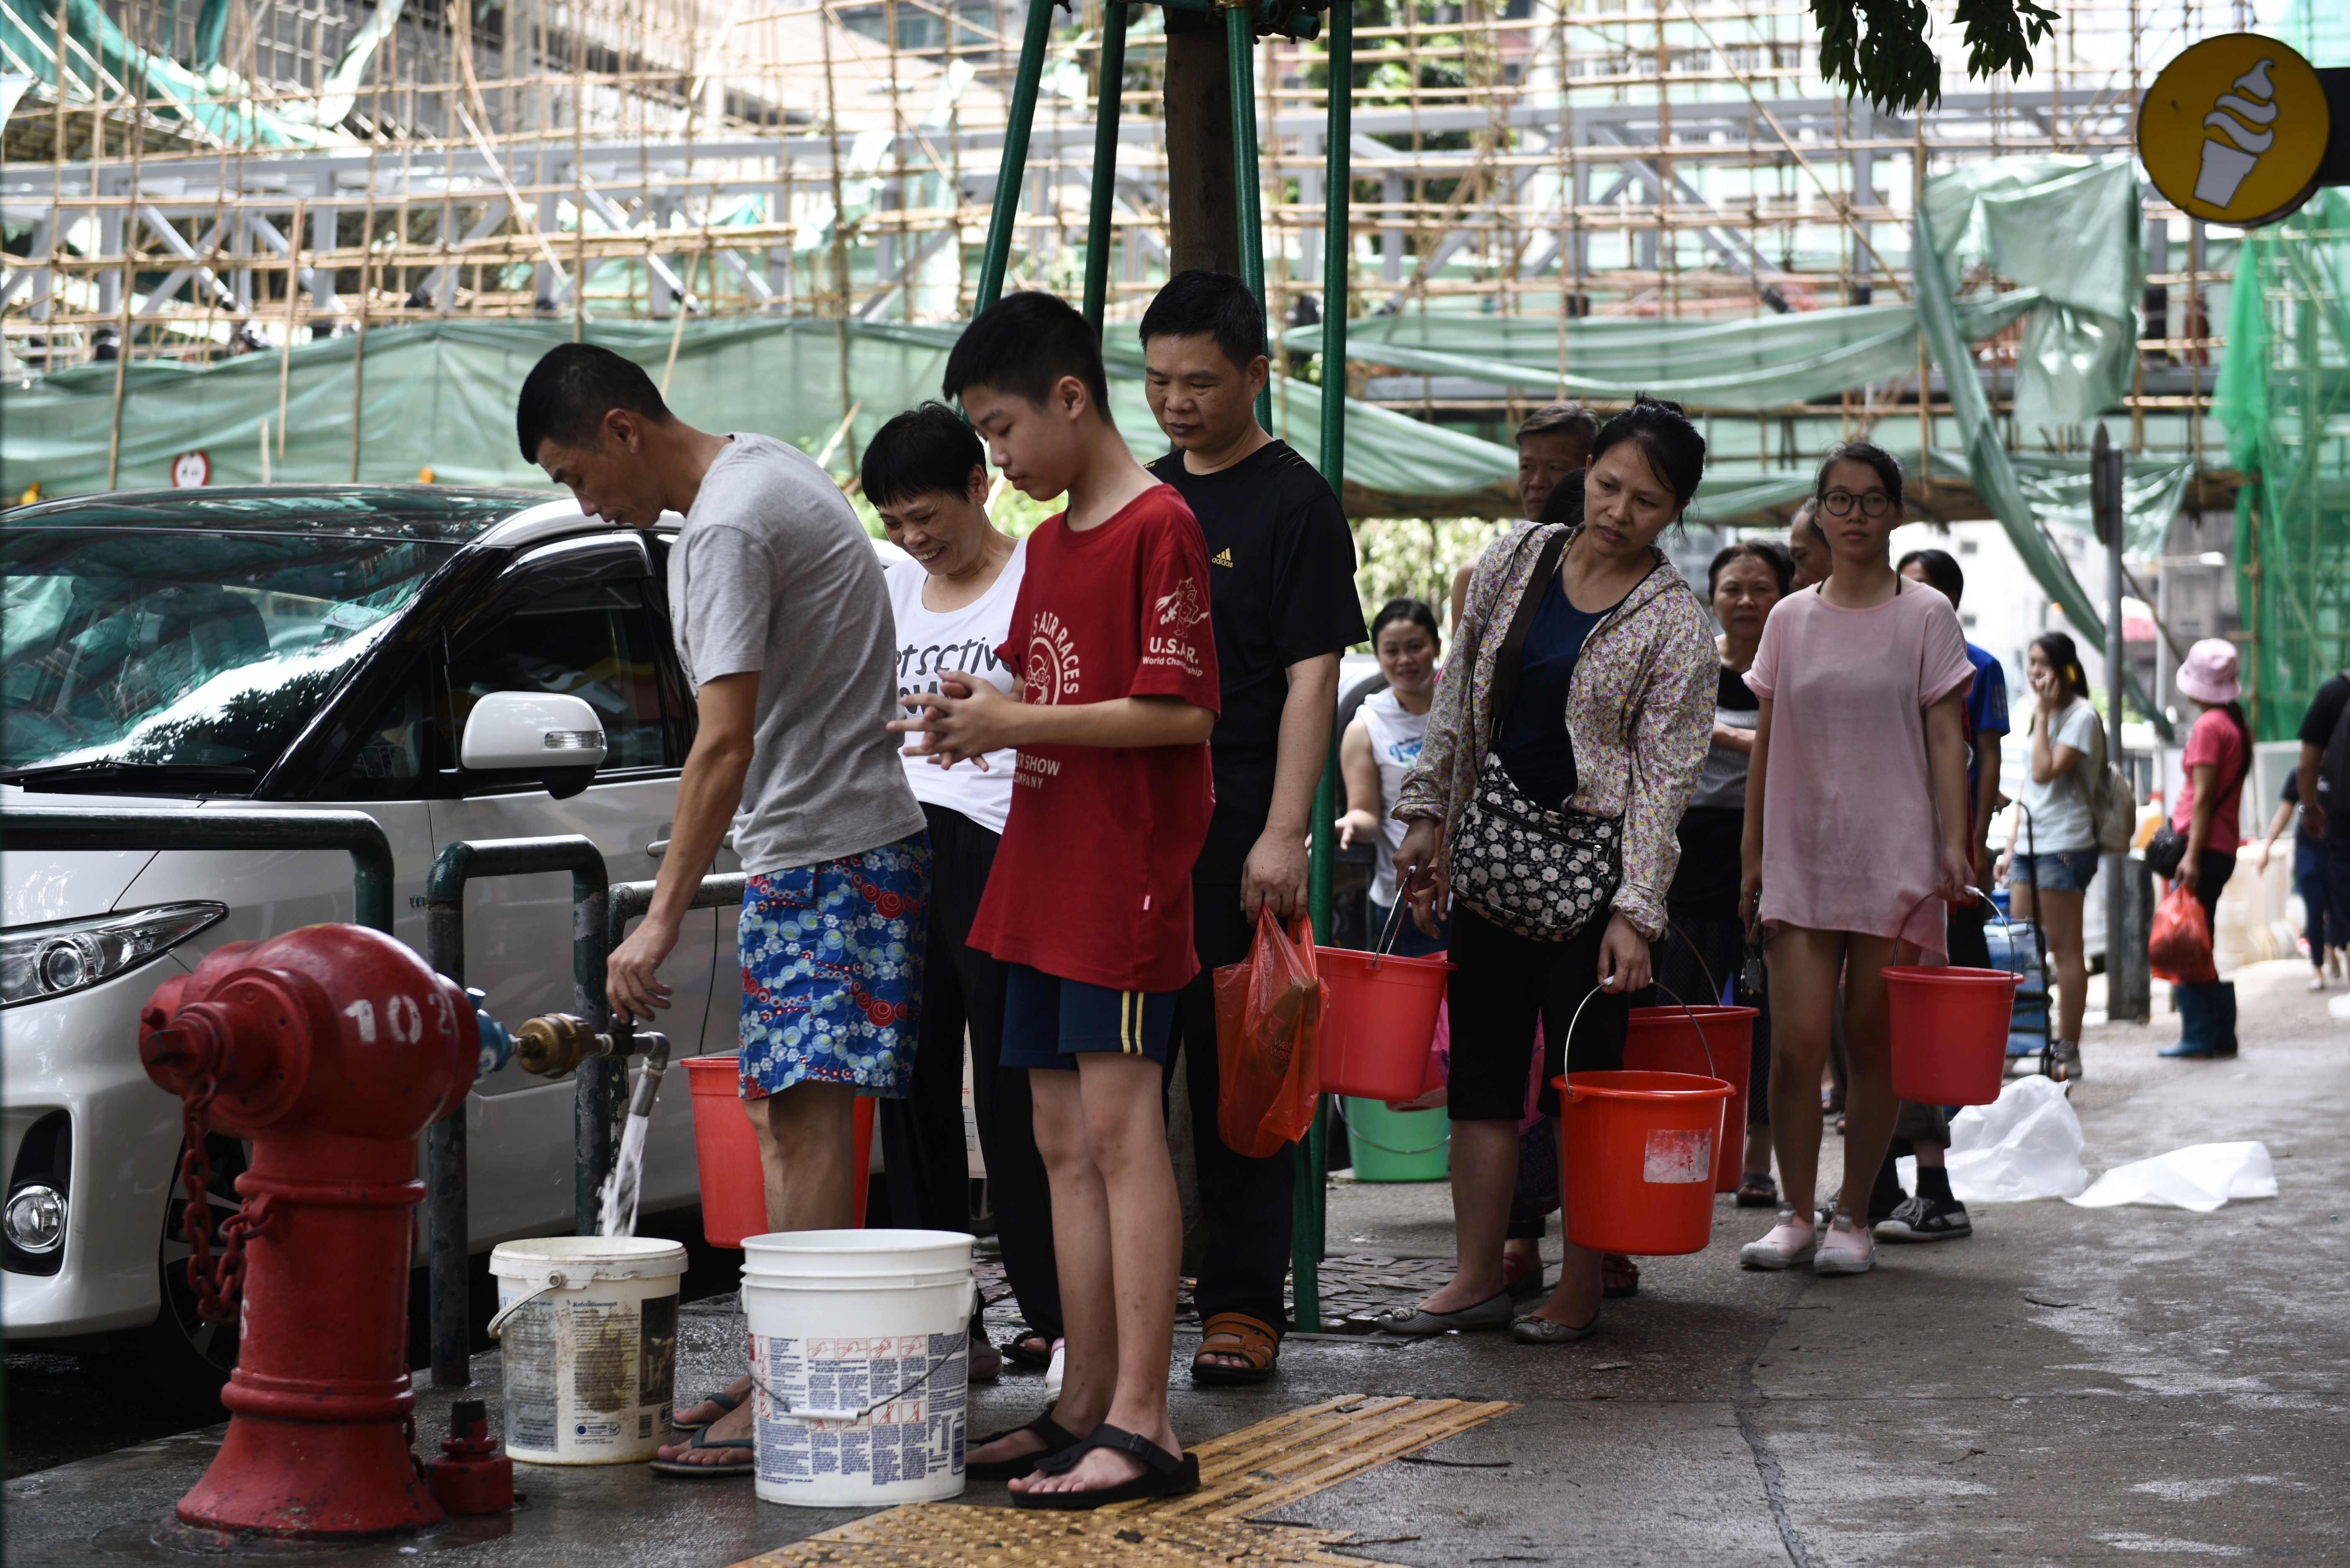 People queue up to collect water from a fire hydrant in Macau on August 24, a day after Typhoon Hato left a trail of destruction, with water supplies badly hit. Photo: AFP